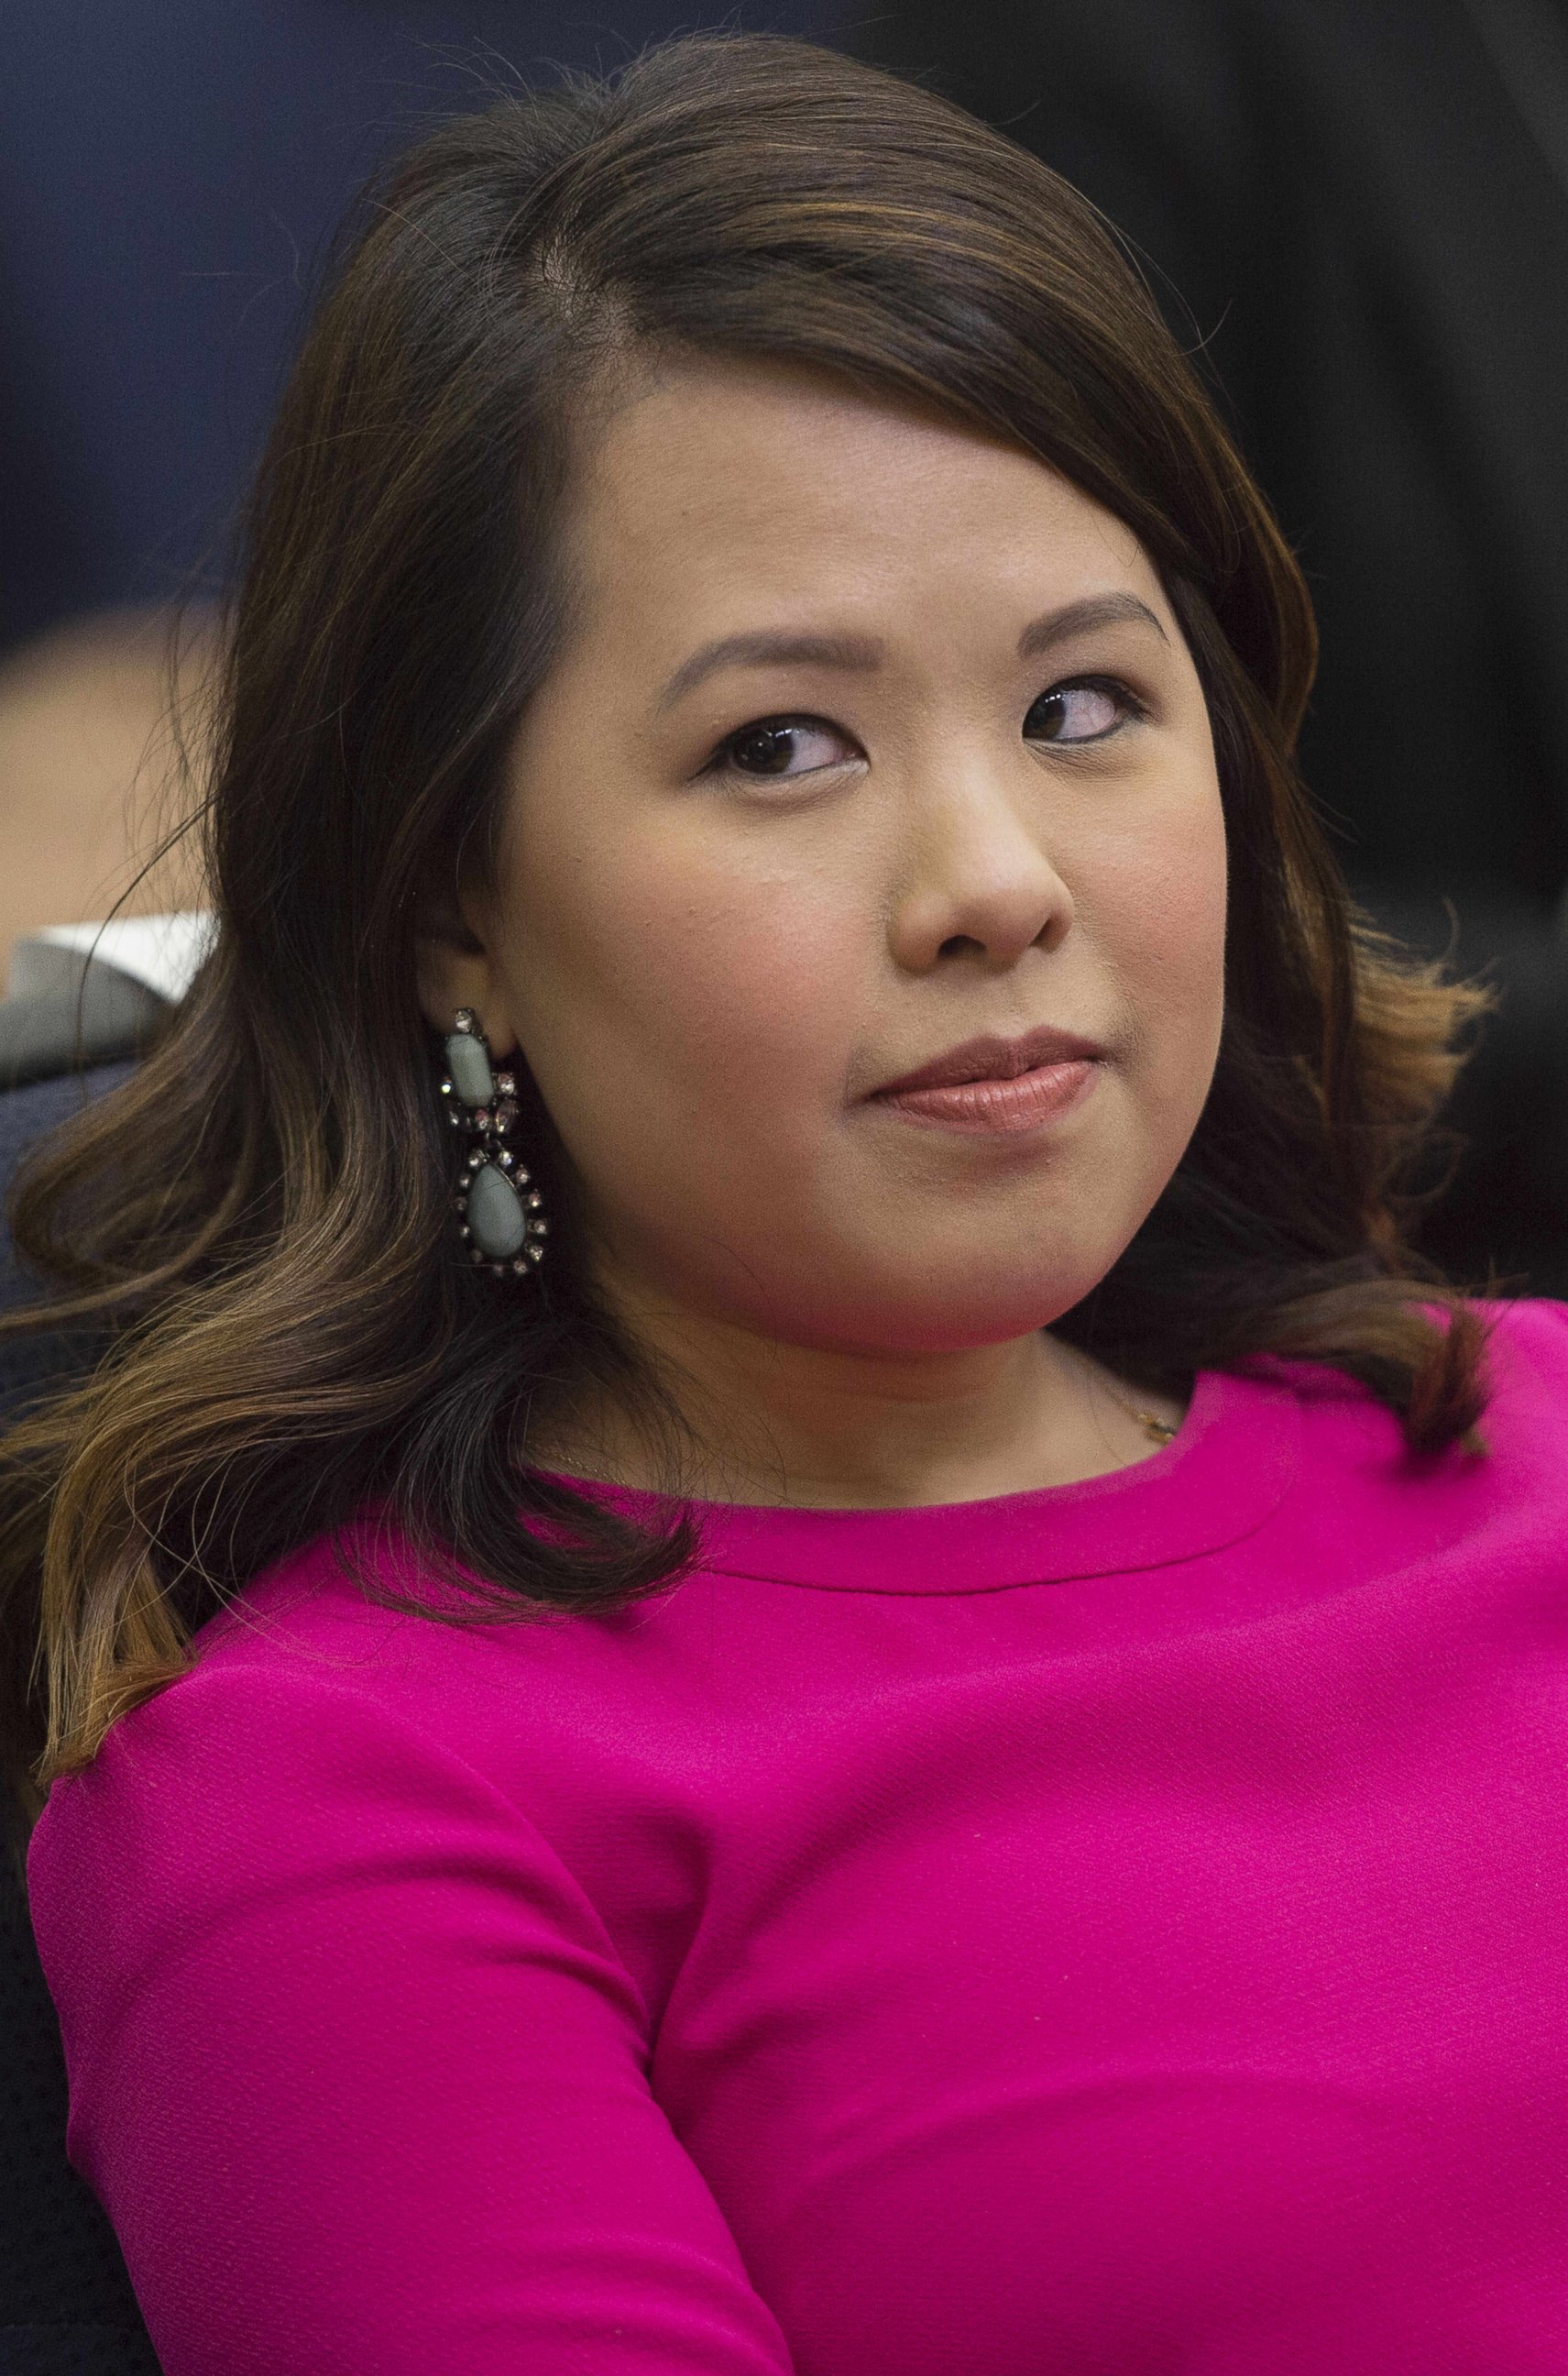 PHOTO: Ebola survivor Nina Pham sits in the audience as US President Barack Obama delivers delivers a speech with Ebola response partners in Washington, D.C. on Feb. 11, 2015.